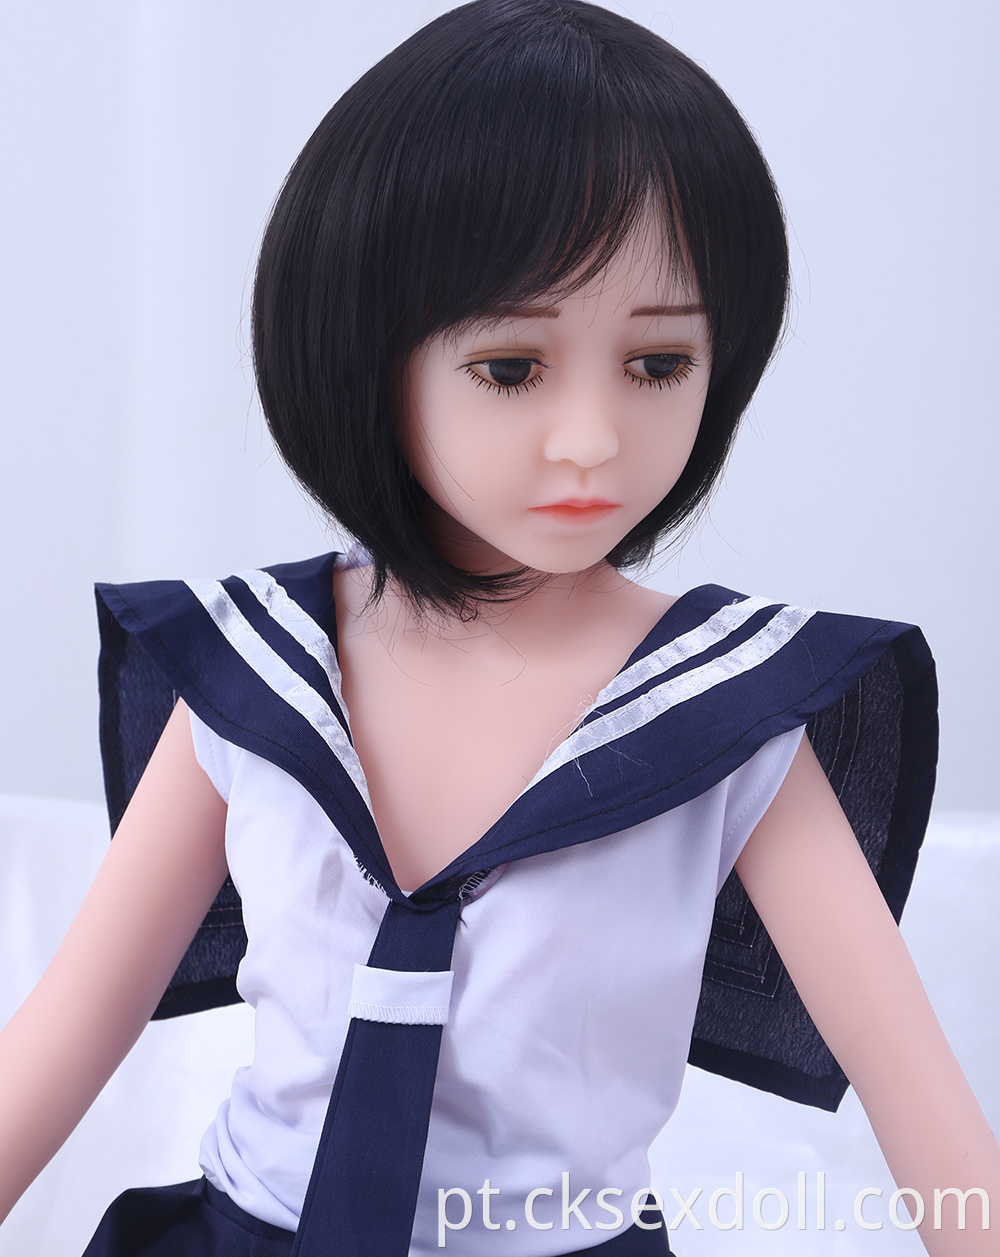 flat chest young girl doll